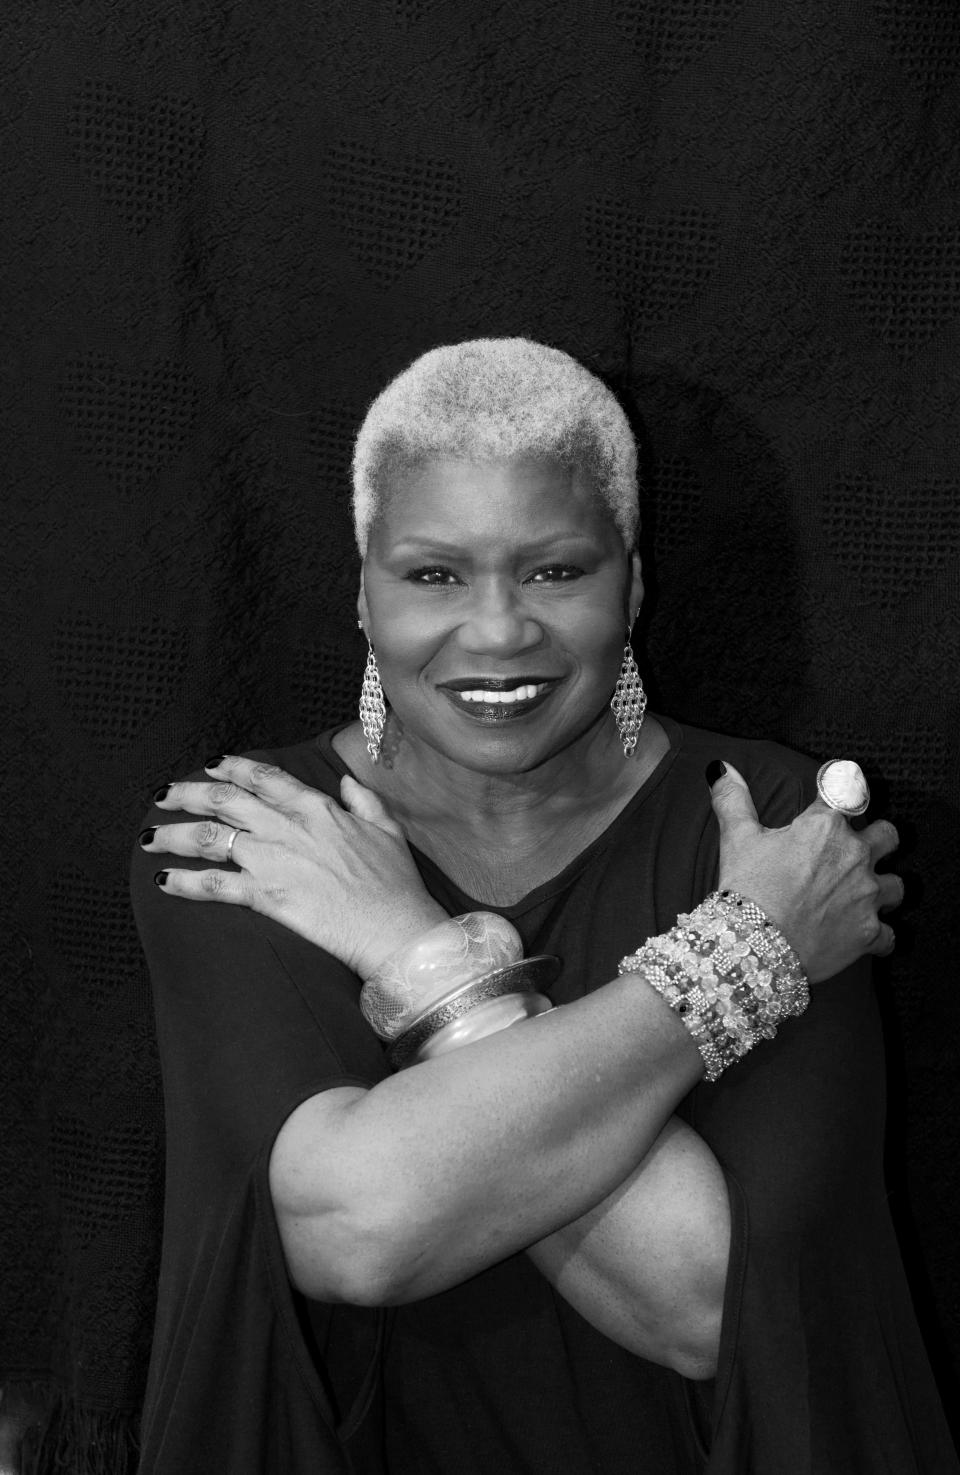 Connie Fredericks-Malone will be performing Sept. 23 at the Rochester Fringe Festival.